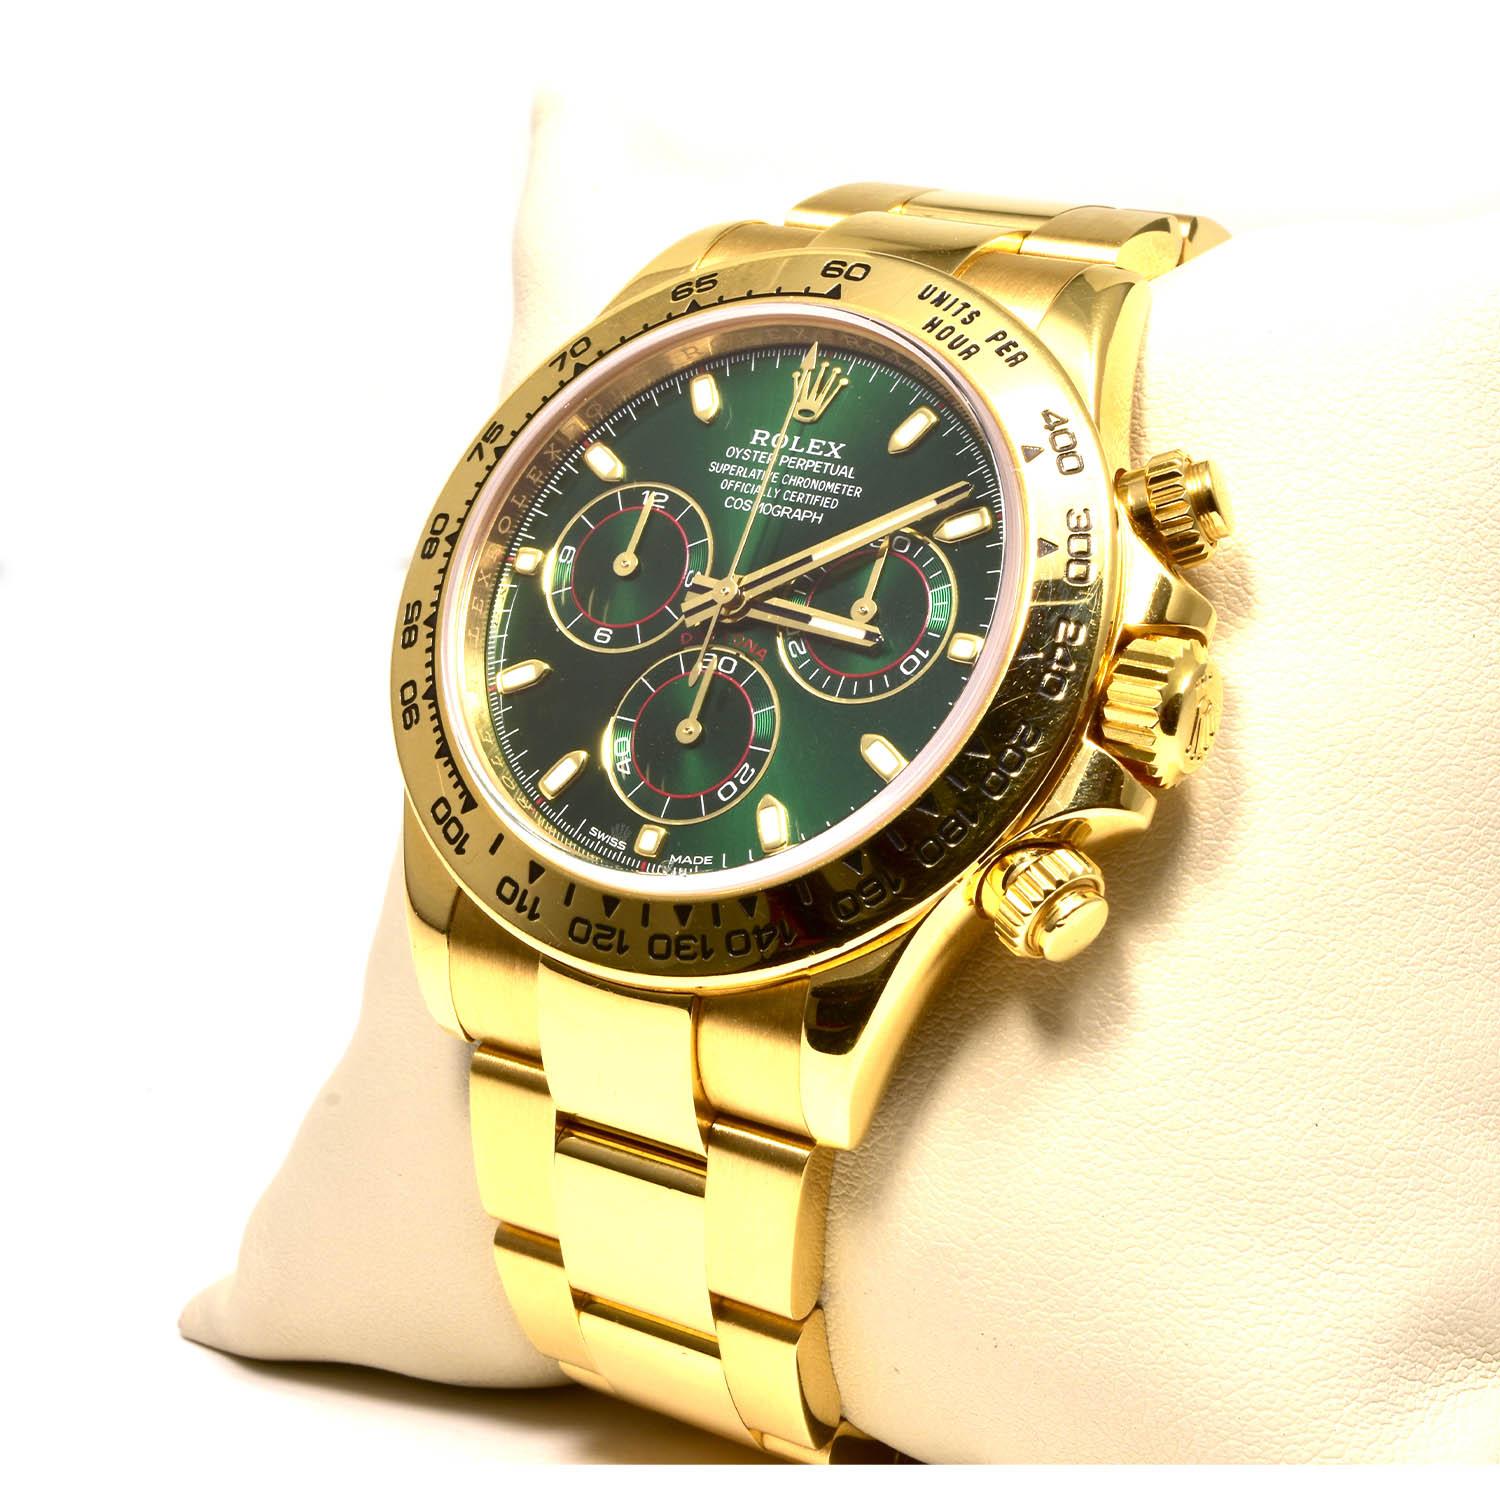 Brand: Rolex
Model: Daytona
Metal: Yellow Gold
Metal Purity: 18k
Dial: Green
Case: 40mm Yellow Gold
Bracelet: Yellow Gold Jubilee
Movement: Automatic
Accessories:
24 month Brilliance Jewels warranty
Rolex Box
Beautiful Rolex Daytona is the watch to